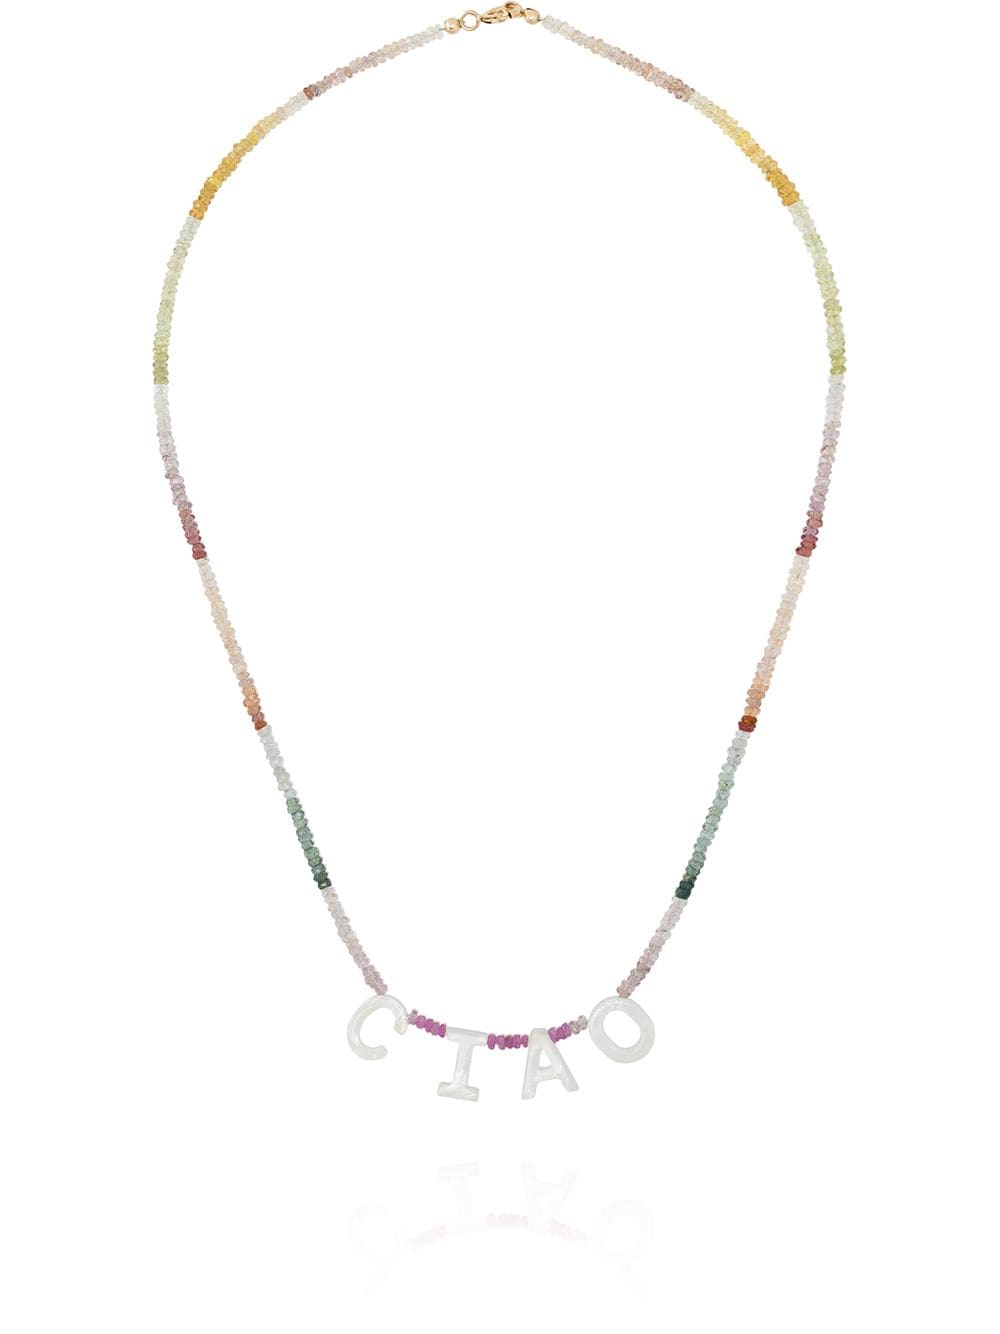 ROXANNE FIRST CIAO RAINBOW-SAPPHIRE NECKLACE